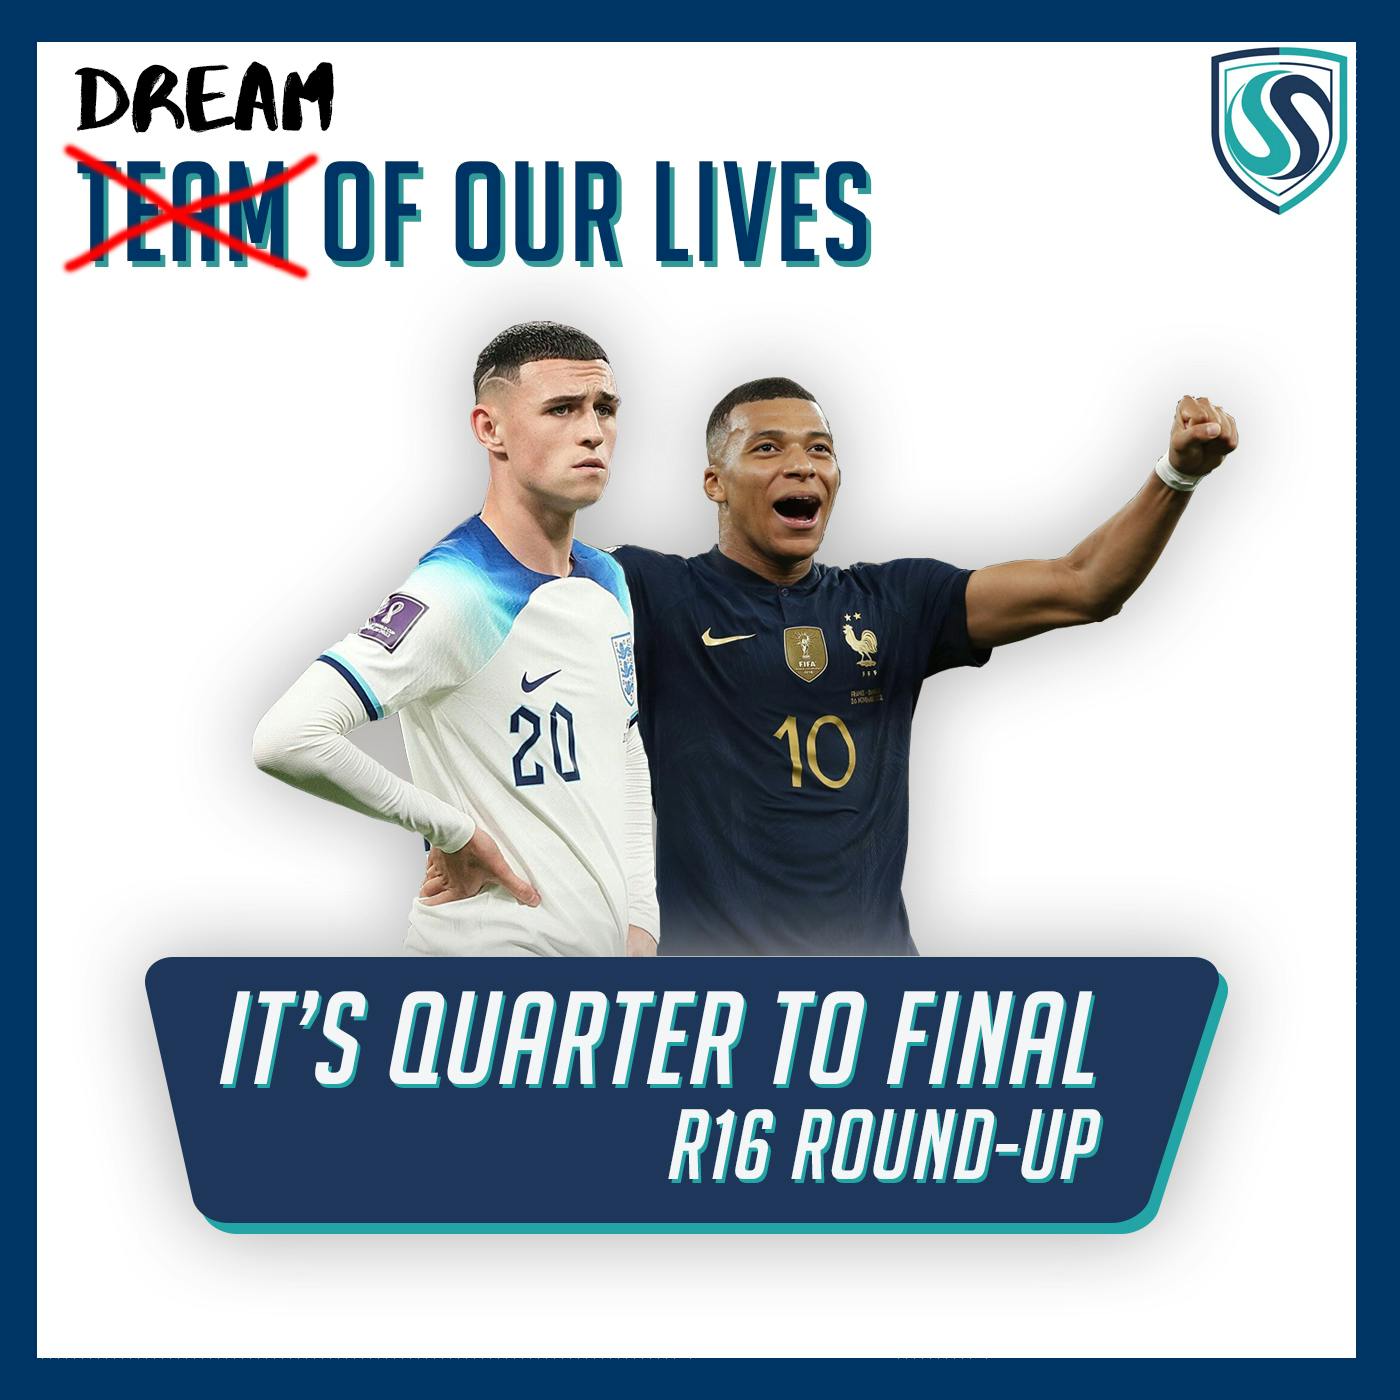 Dream of our Lives: It's Quarter to FINAL!